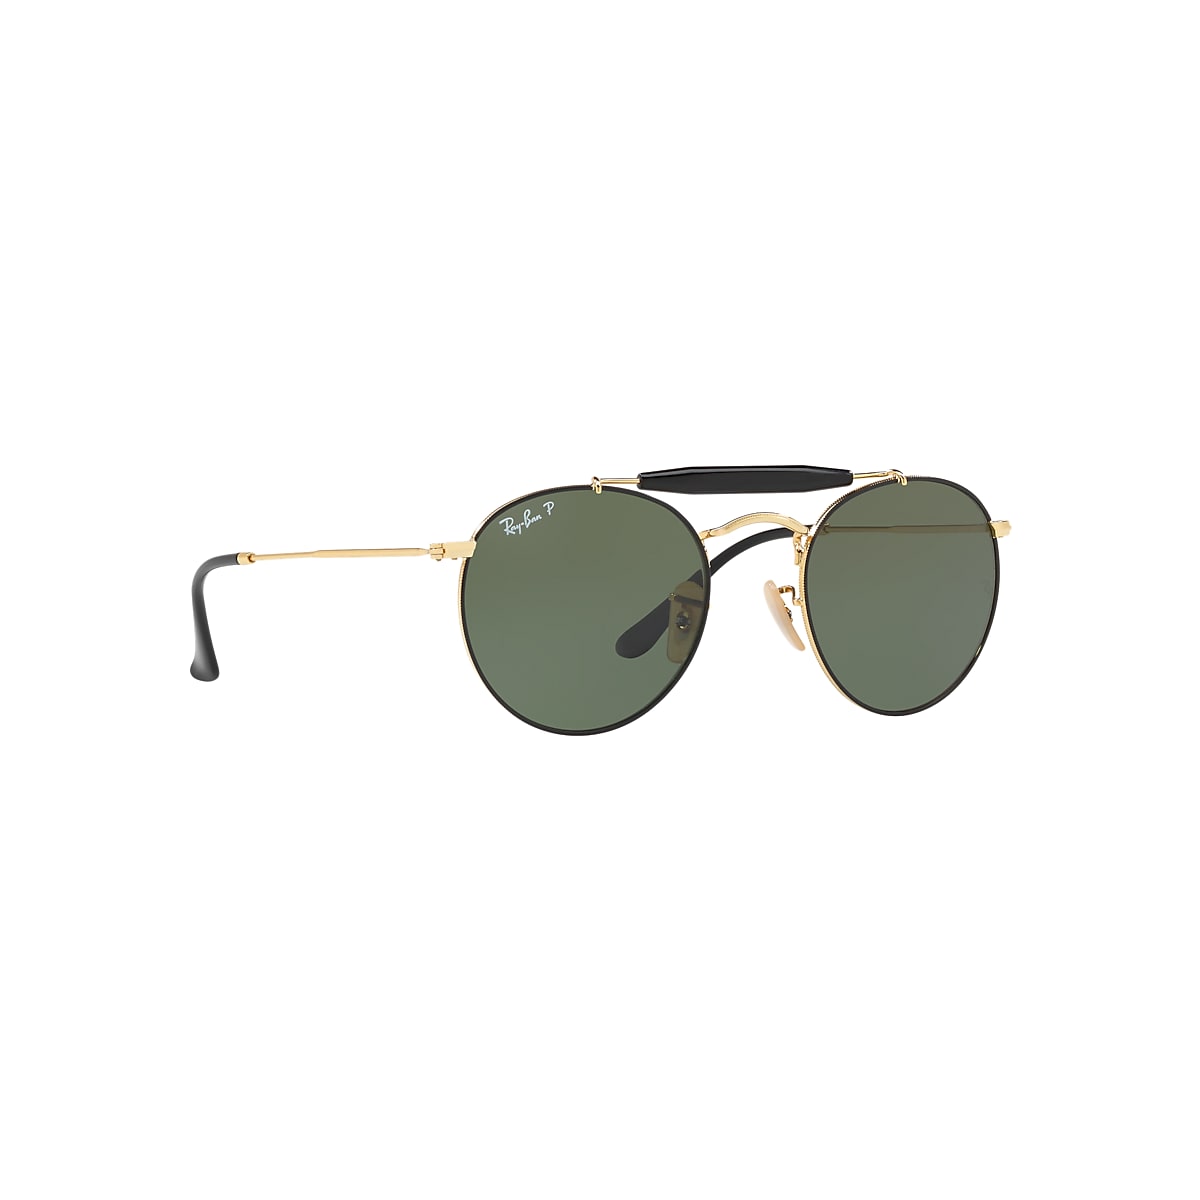 Rb3747 Sunglasses in Black and Green | Ray-Ban®